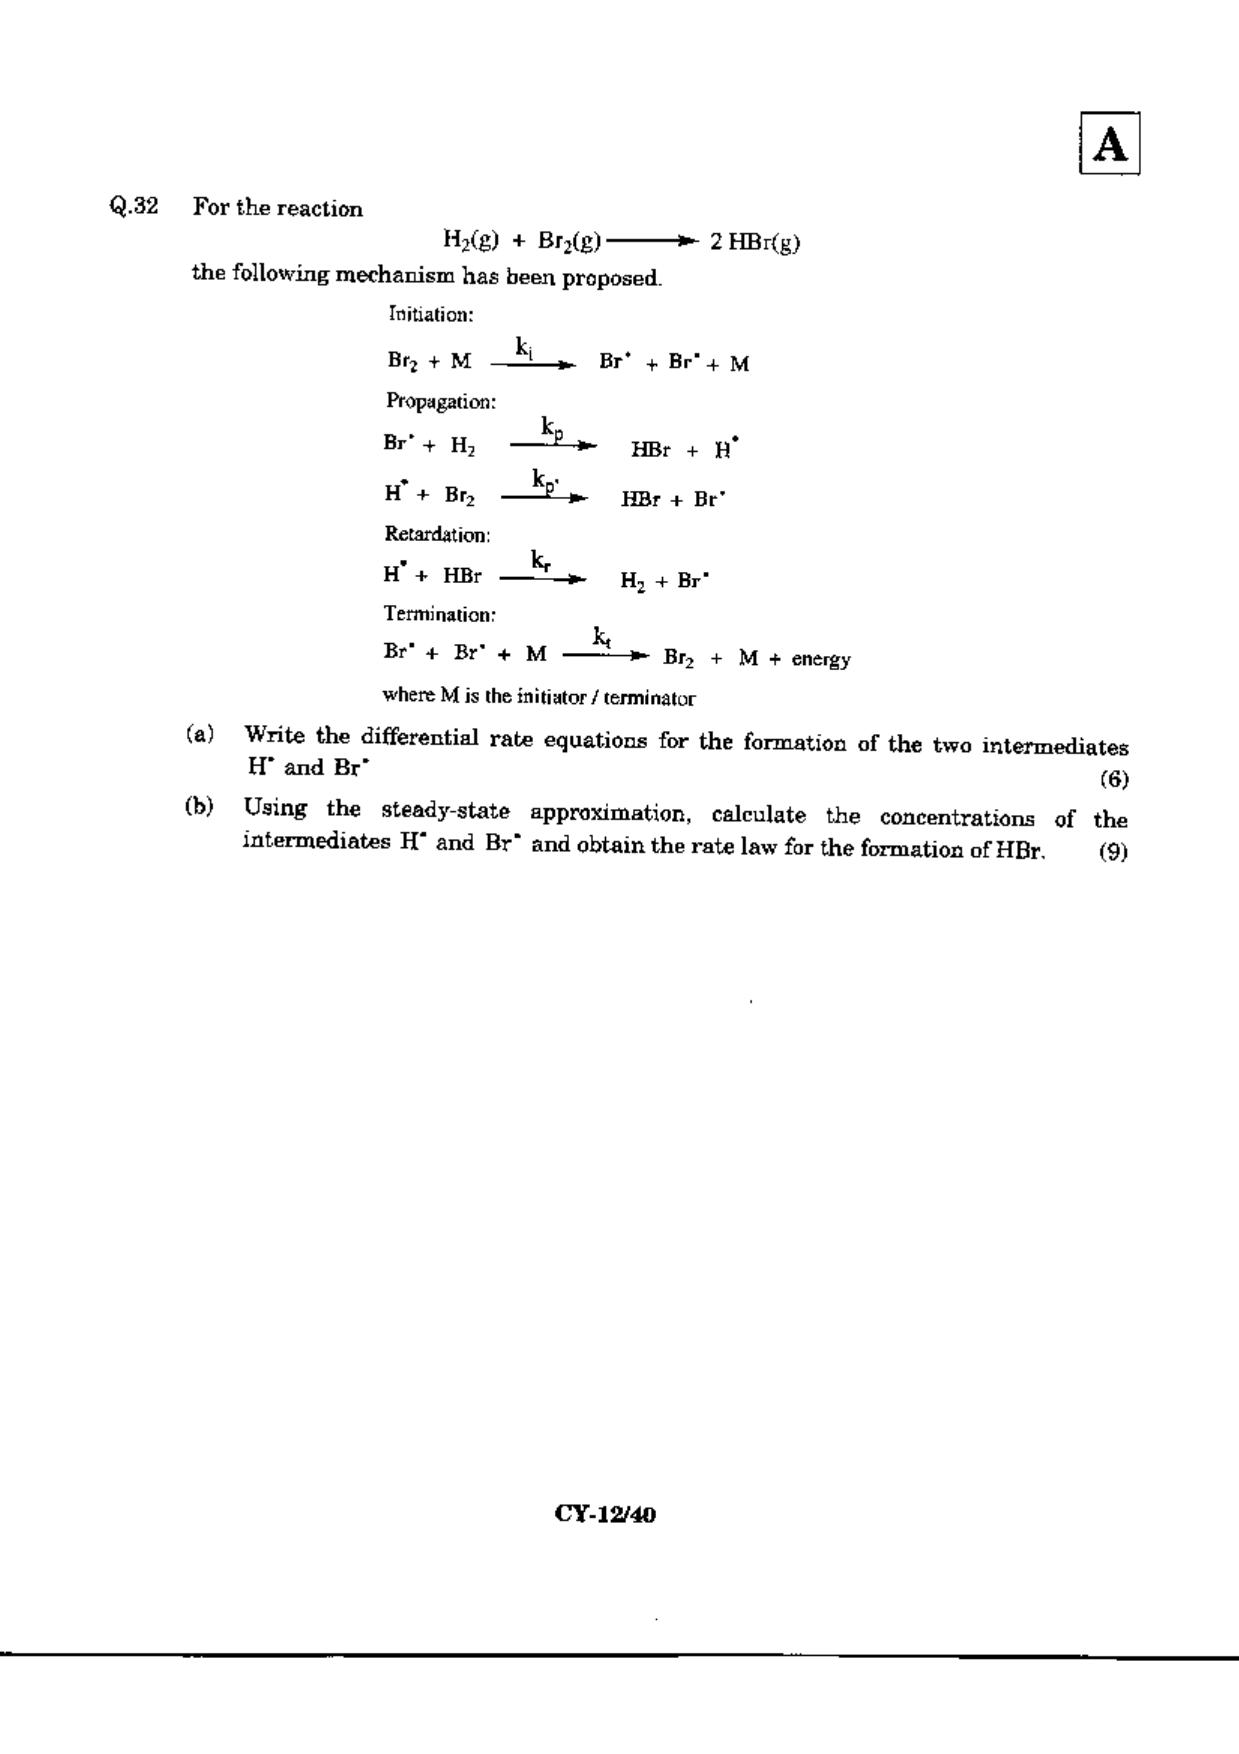 JAM 2010: CY Question Paper - Page 14